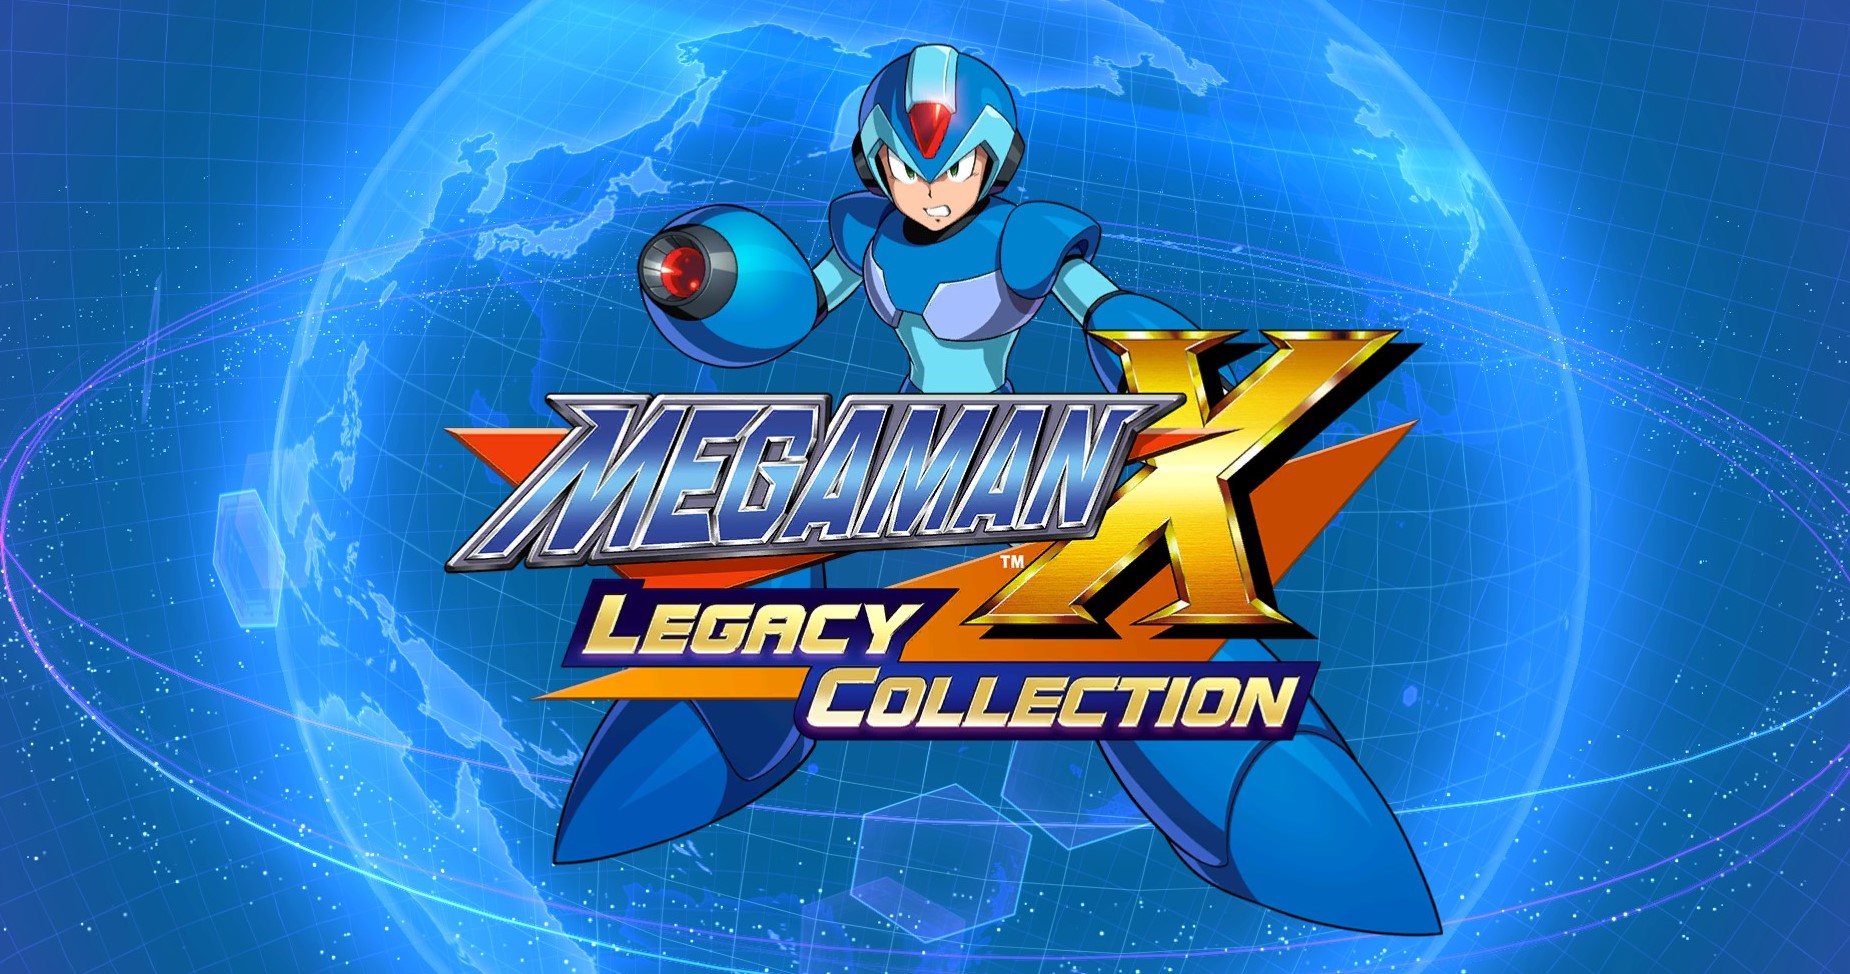 A Quick Word On Which Versions Of Mega Man X Legacy Collection To Get Or Avoid Ars Technica